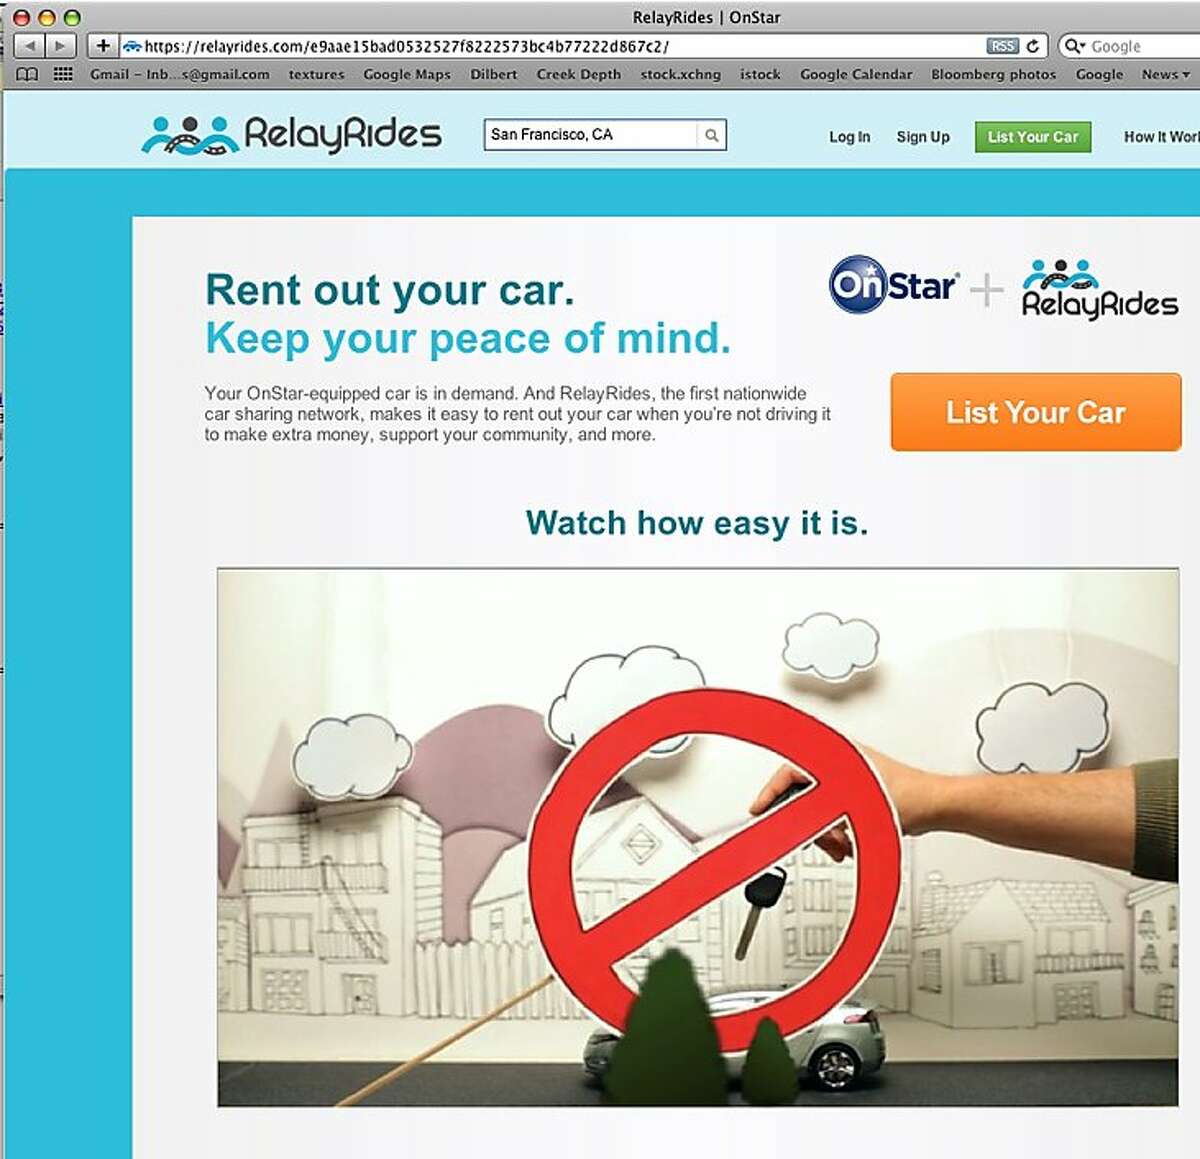 Relayrides new AP will allow GM onstar users to rent their car without lending out the keys or meeting the renter.